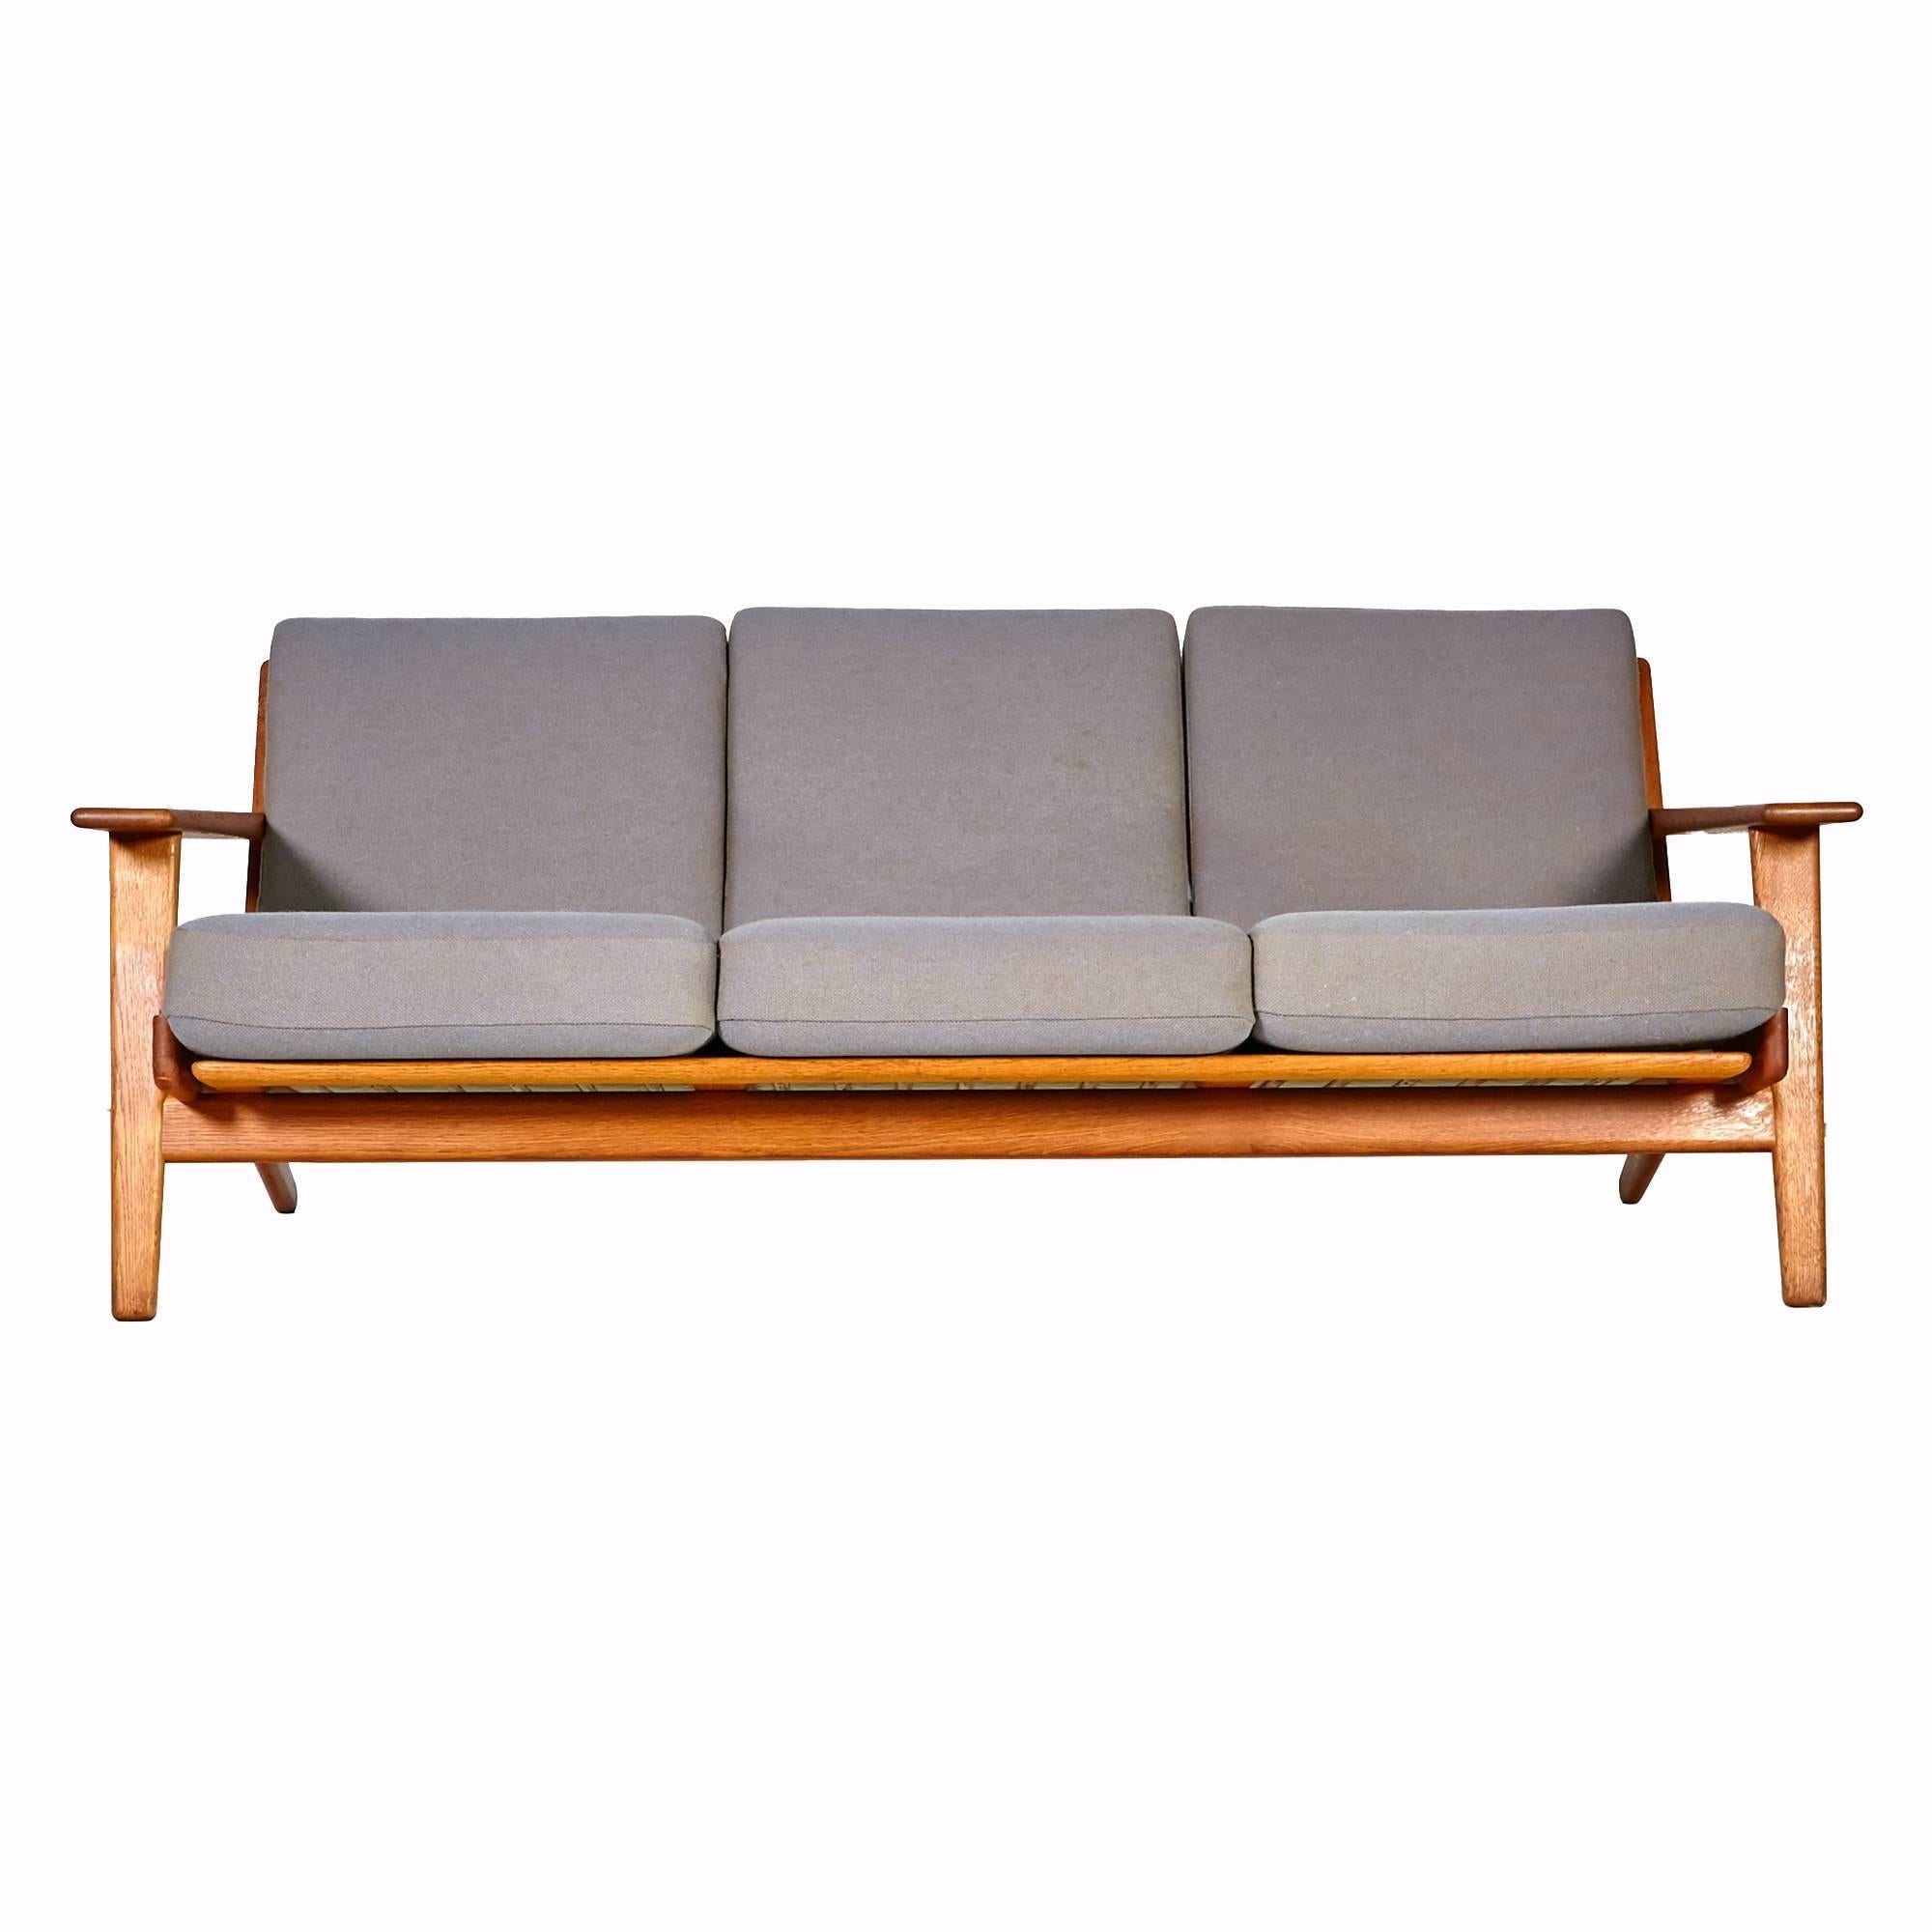 1955 three seat oak GE 290 sofa with paddle arms designed by Hans J. Wegner for GETAMA of Denmark. Original fabric with minor wear from use. Marked on the underside.